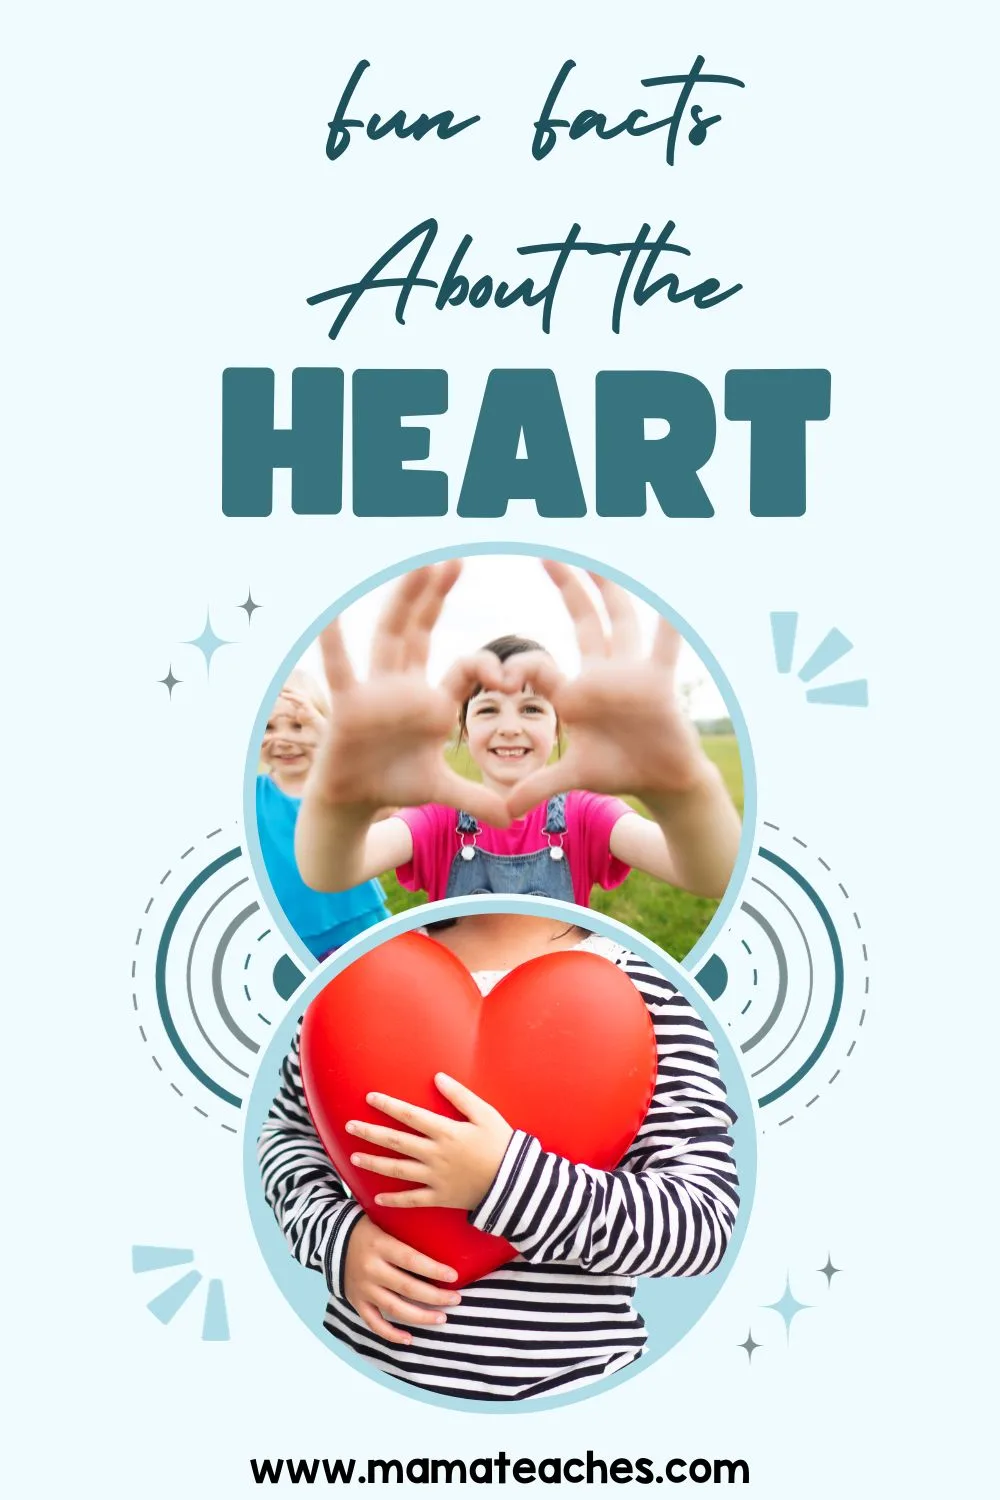 Fun Facts About the Heart